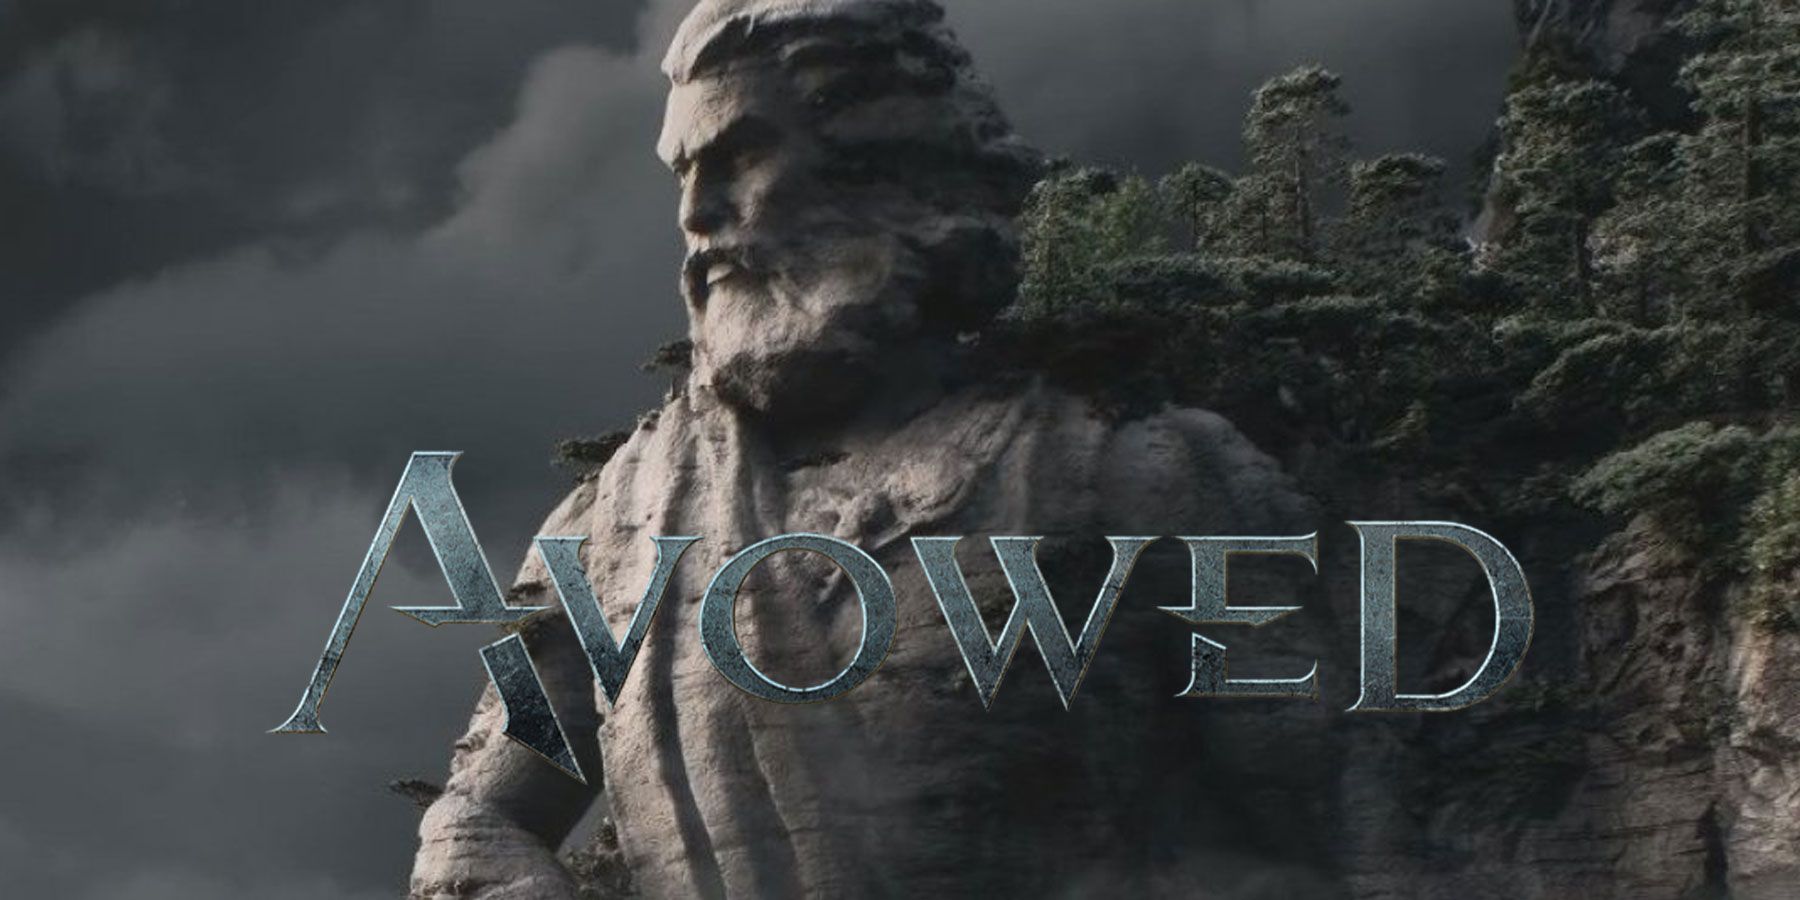 avowed release date ps4